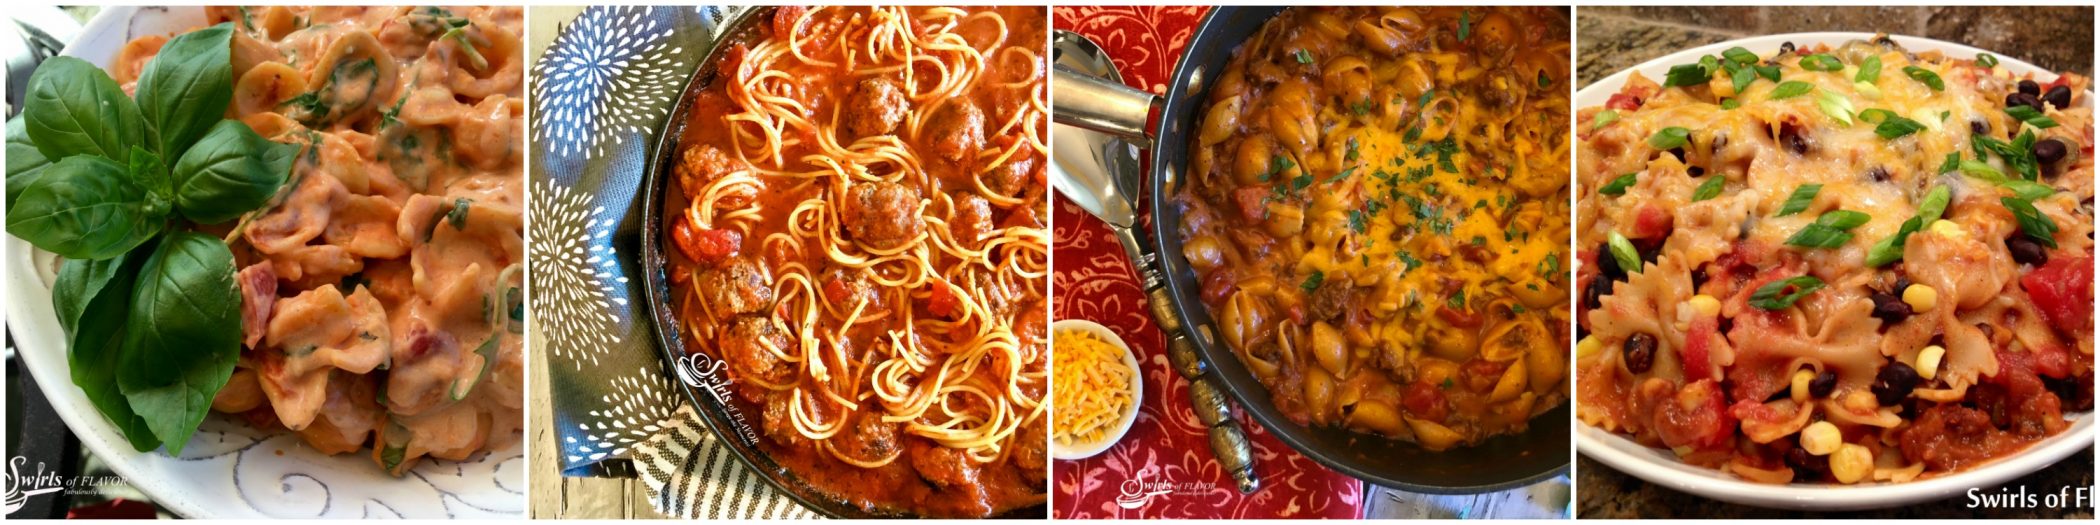 Photos of four recipes: Creamy Tomato Pasta, Spaghetti and Meatballs, chili Mac and Cheese and Mexicali Pasta